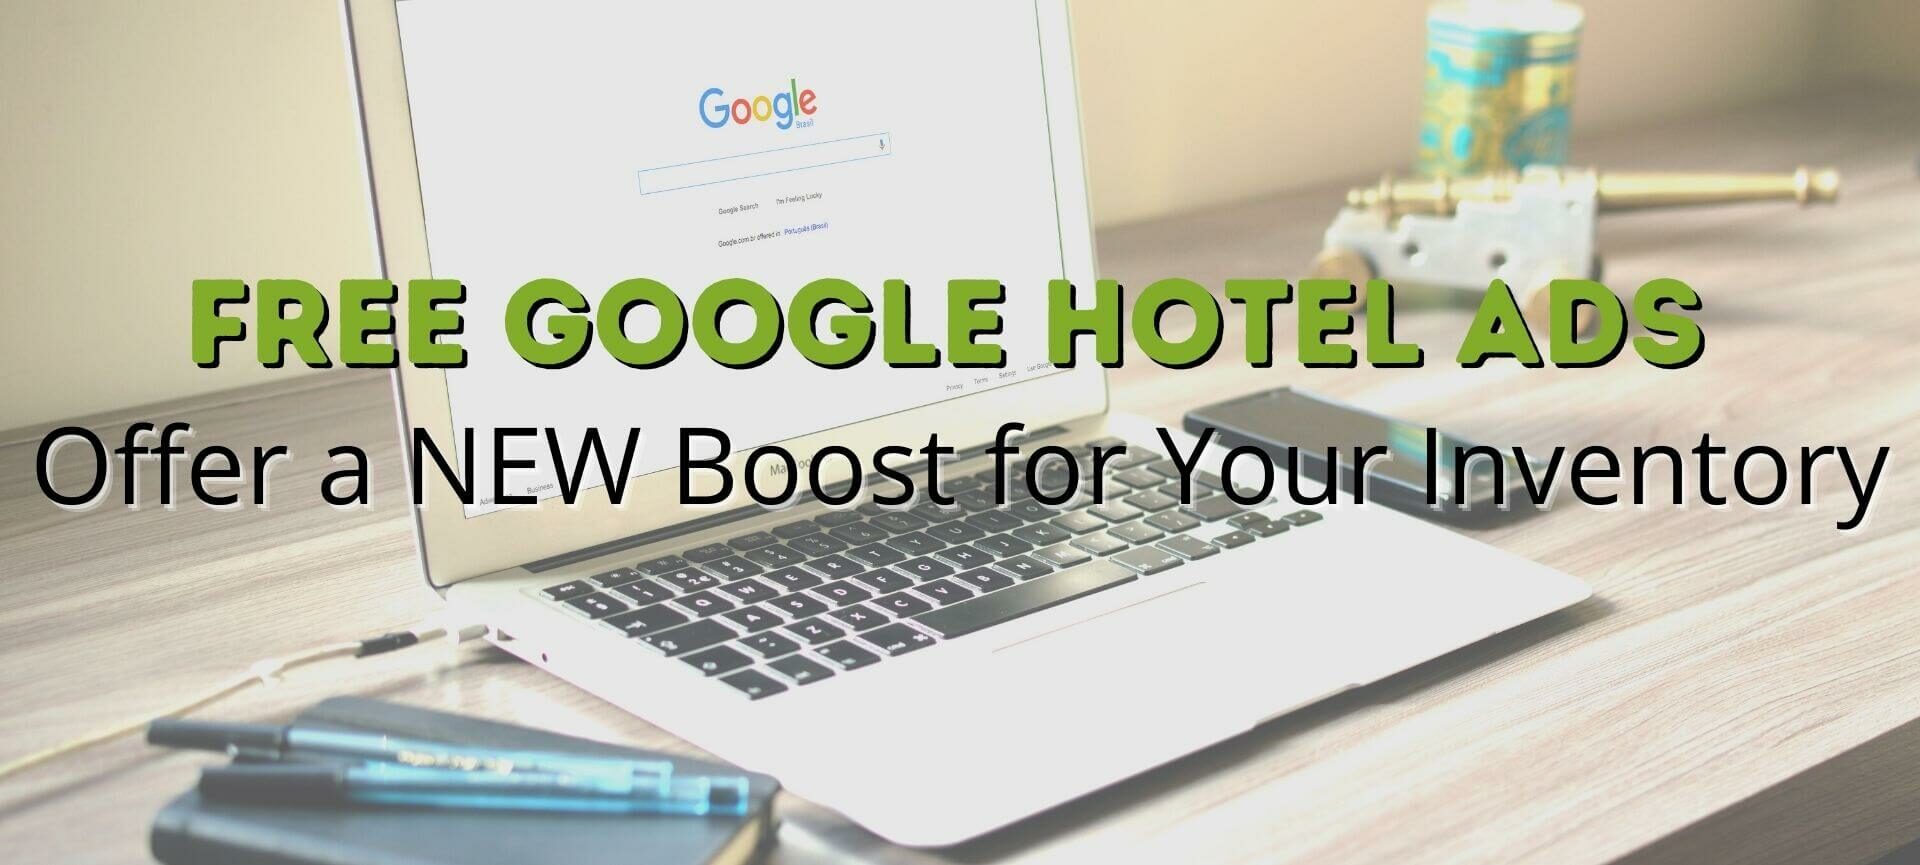 FREE Google Hotel Ads Offer a NEW Boost for Your Inventory over a background of a laptop computer open to Google browser, sitting on a desk